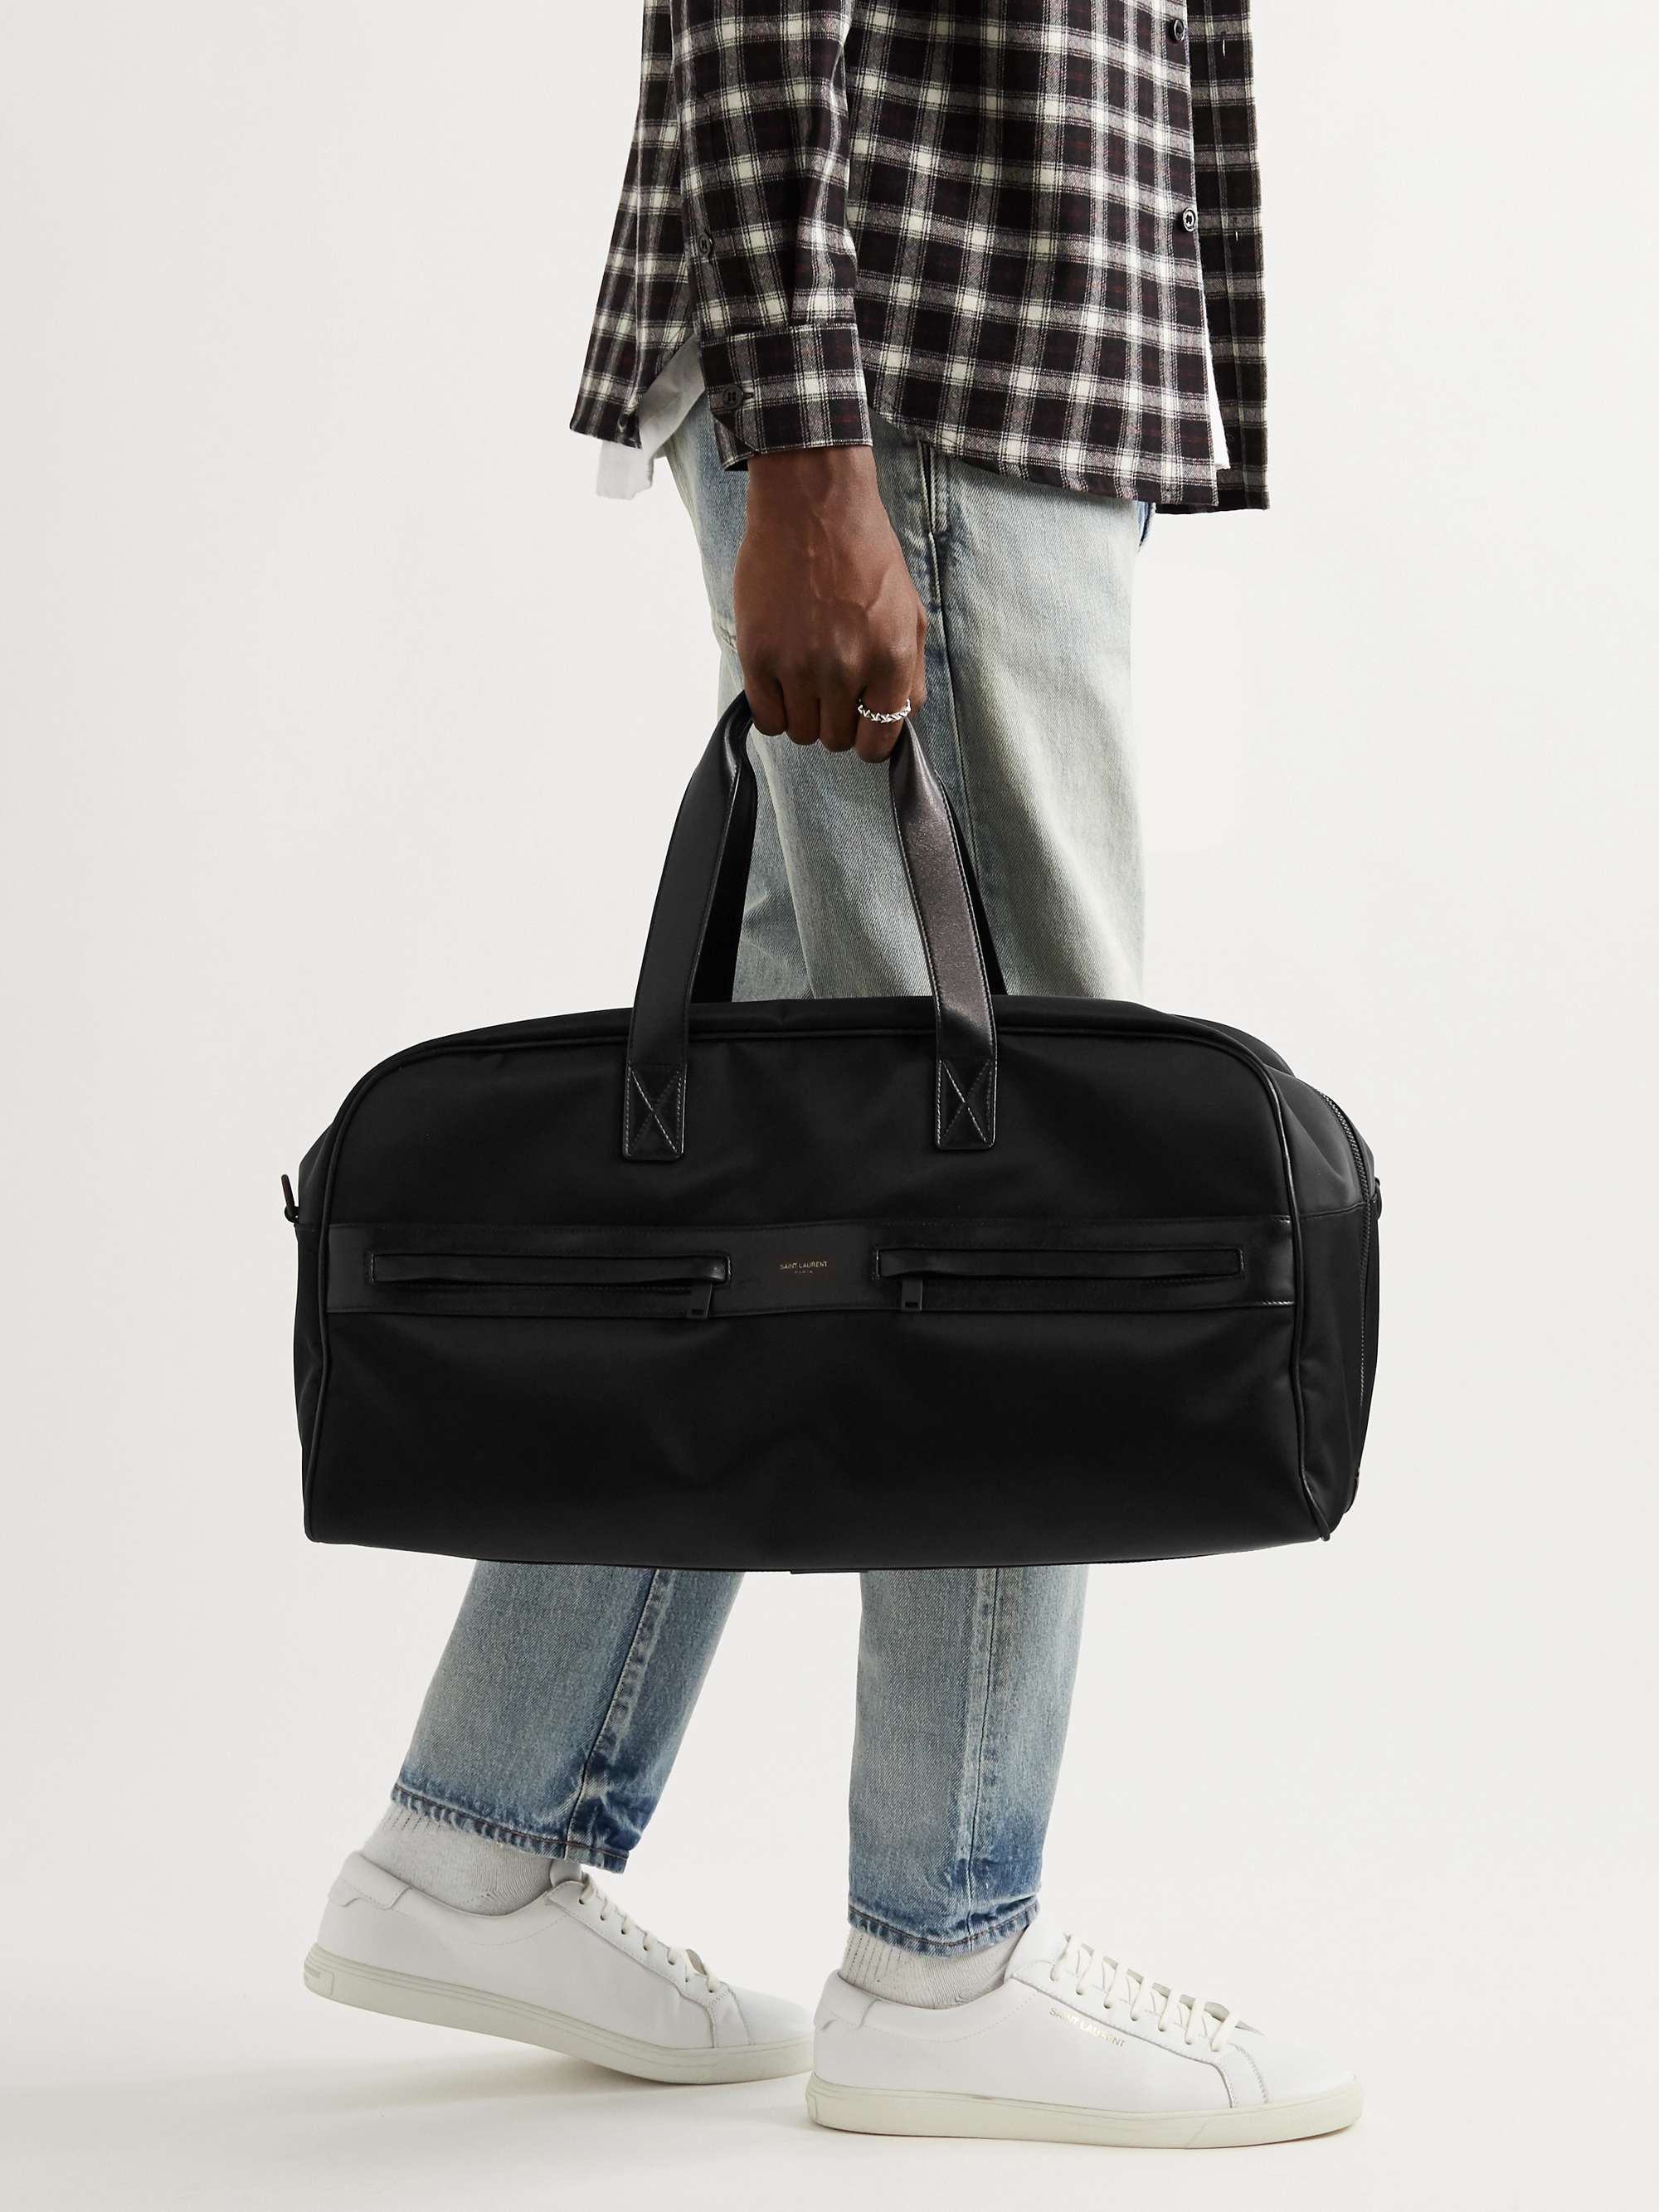 SAINT LAURENT Camp Leather-Trimmed Shell Holdall